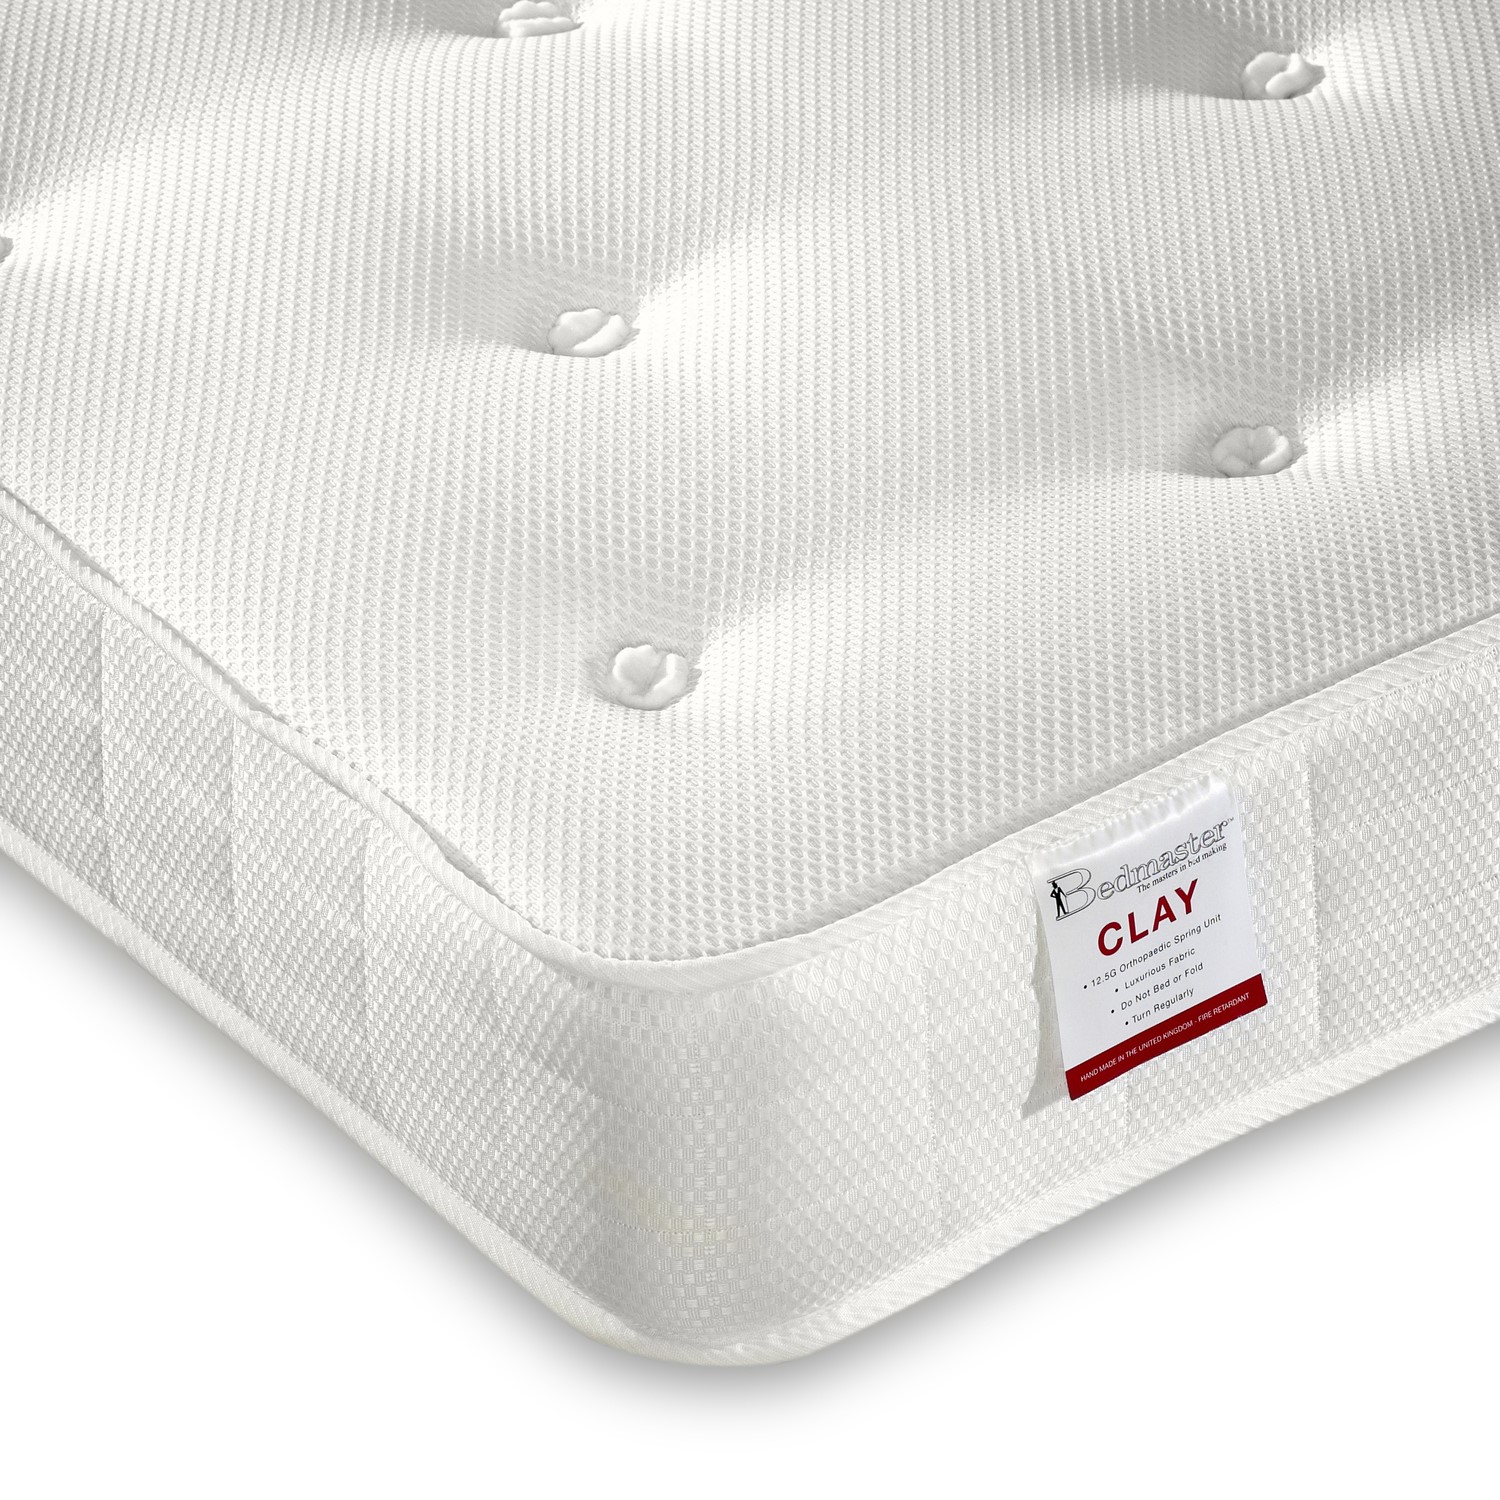 Clay firm orthopaedic open coil spring mattress - small single